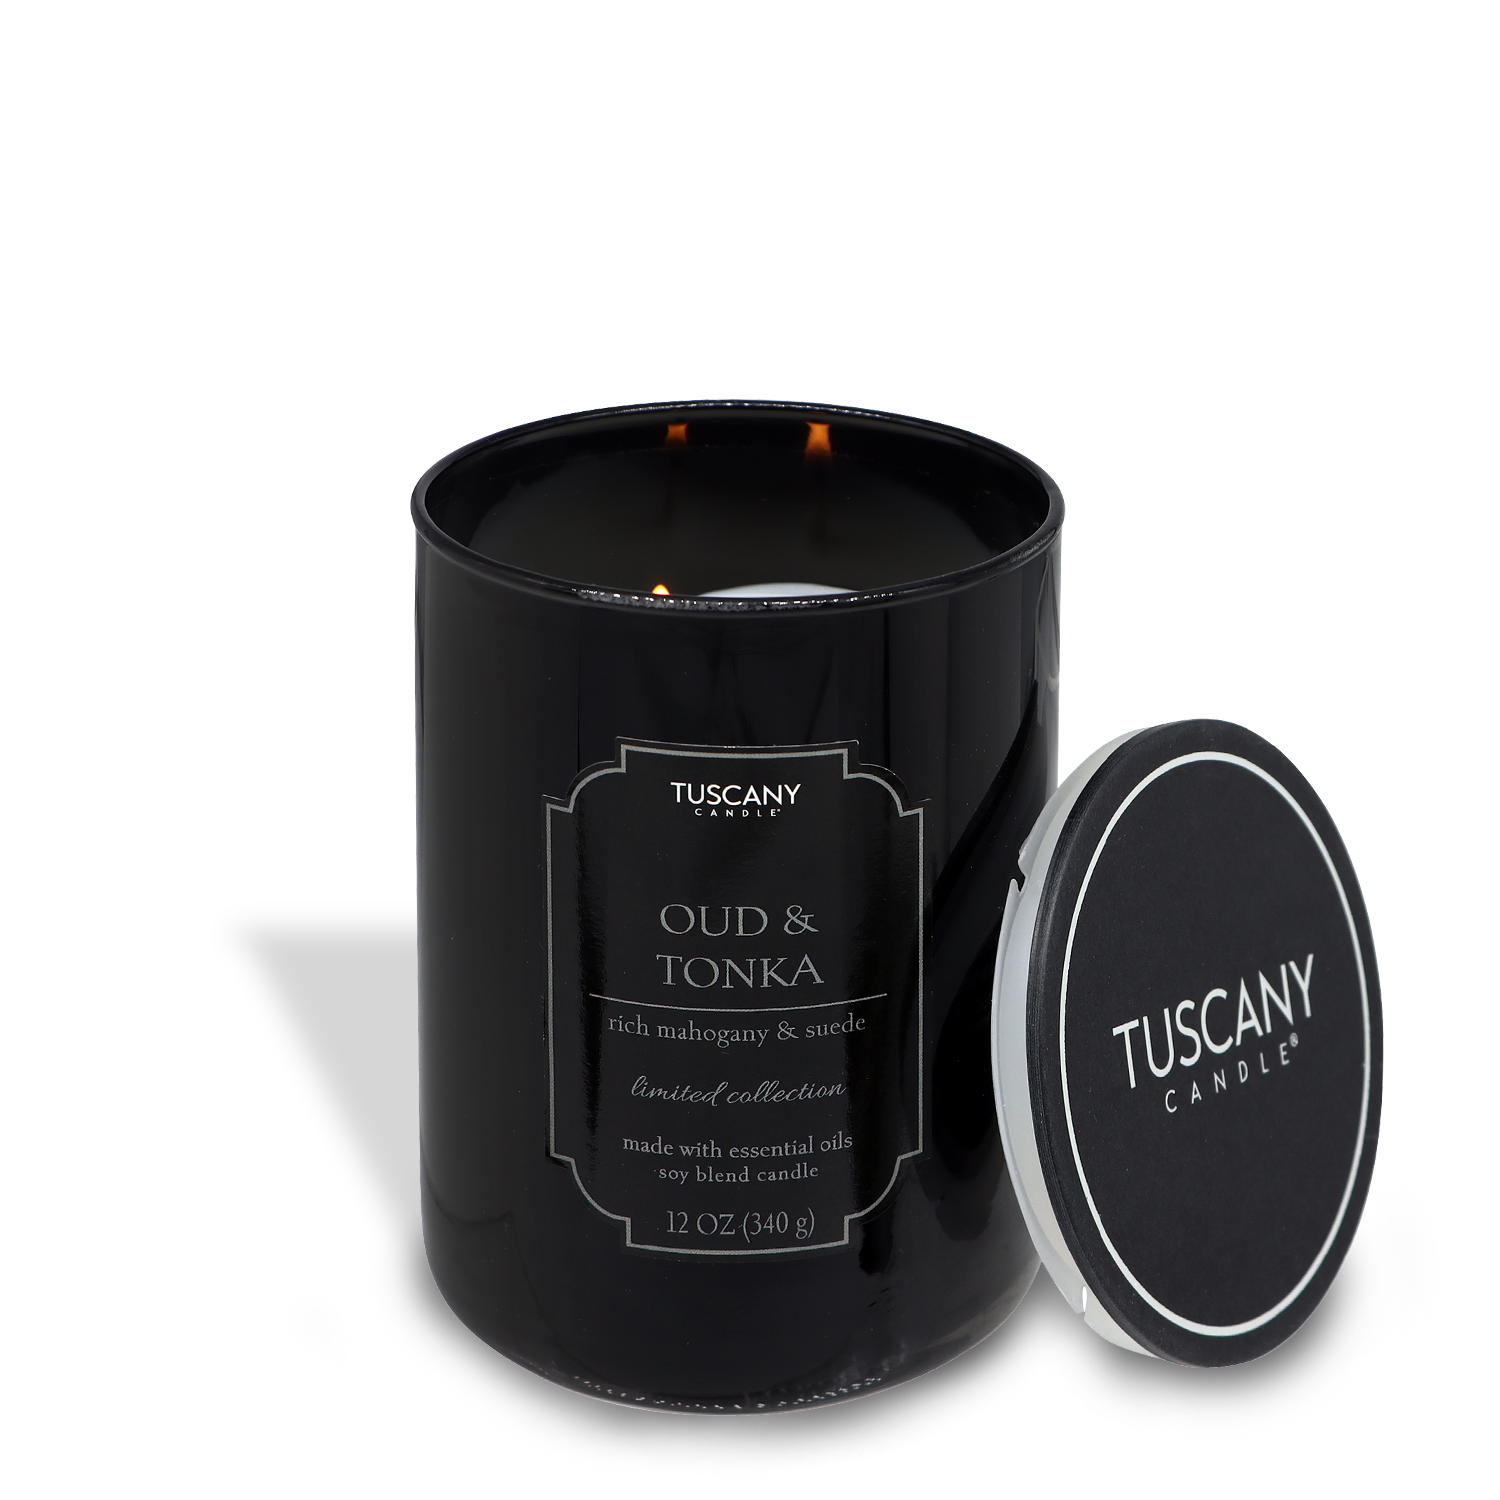 A lit Oud & Tonka (12 oz) candle in a black glass container, labeled "Mahogany Suede" with a metal lid next to it, on a white background.